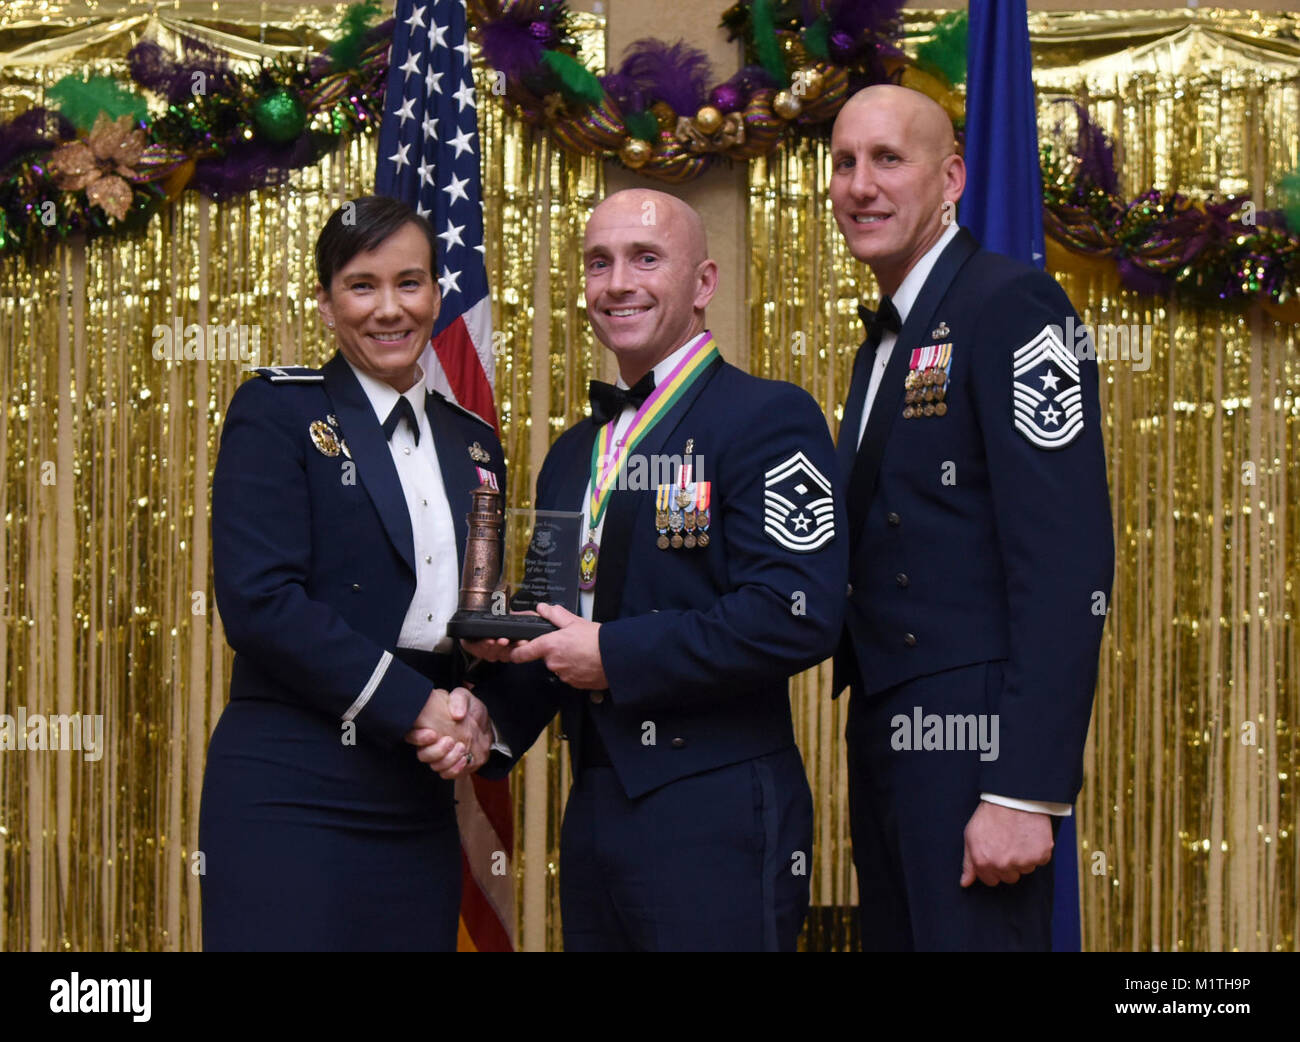 Col. Debra Lovette, 81st Training Wing commander, and Chief Master Sgt. Kenneth Carter, 81st TRW command chief, present Senior Master Sgt. Jason Buckley, 81st Medical Operations Squadron first sergeant, with the First Sergeant Annual Award during the 2017 Keesler Annual Awards Ceremony at the Bay Breeze Event Center Jan. 25, 2018, on Keesler Air Force Base, Mississippi. During the ceremony base leadership recognized outstanding Airmen and civilians from across the installation for their accomplishments throughout 2017. (U.S. Air Force Stock Photo